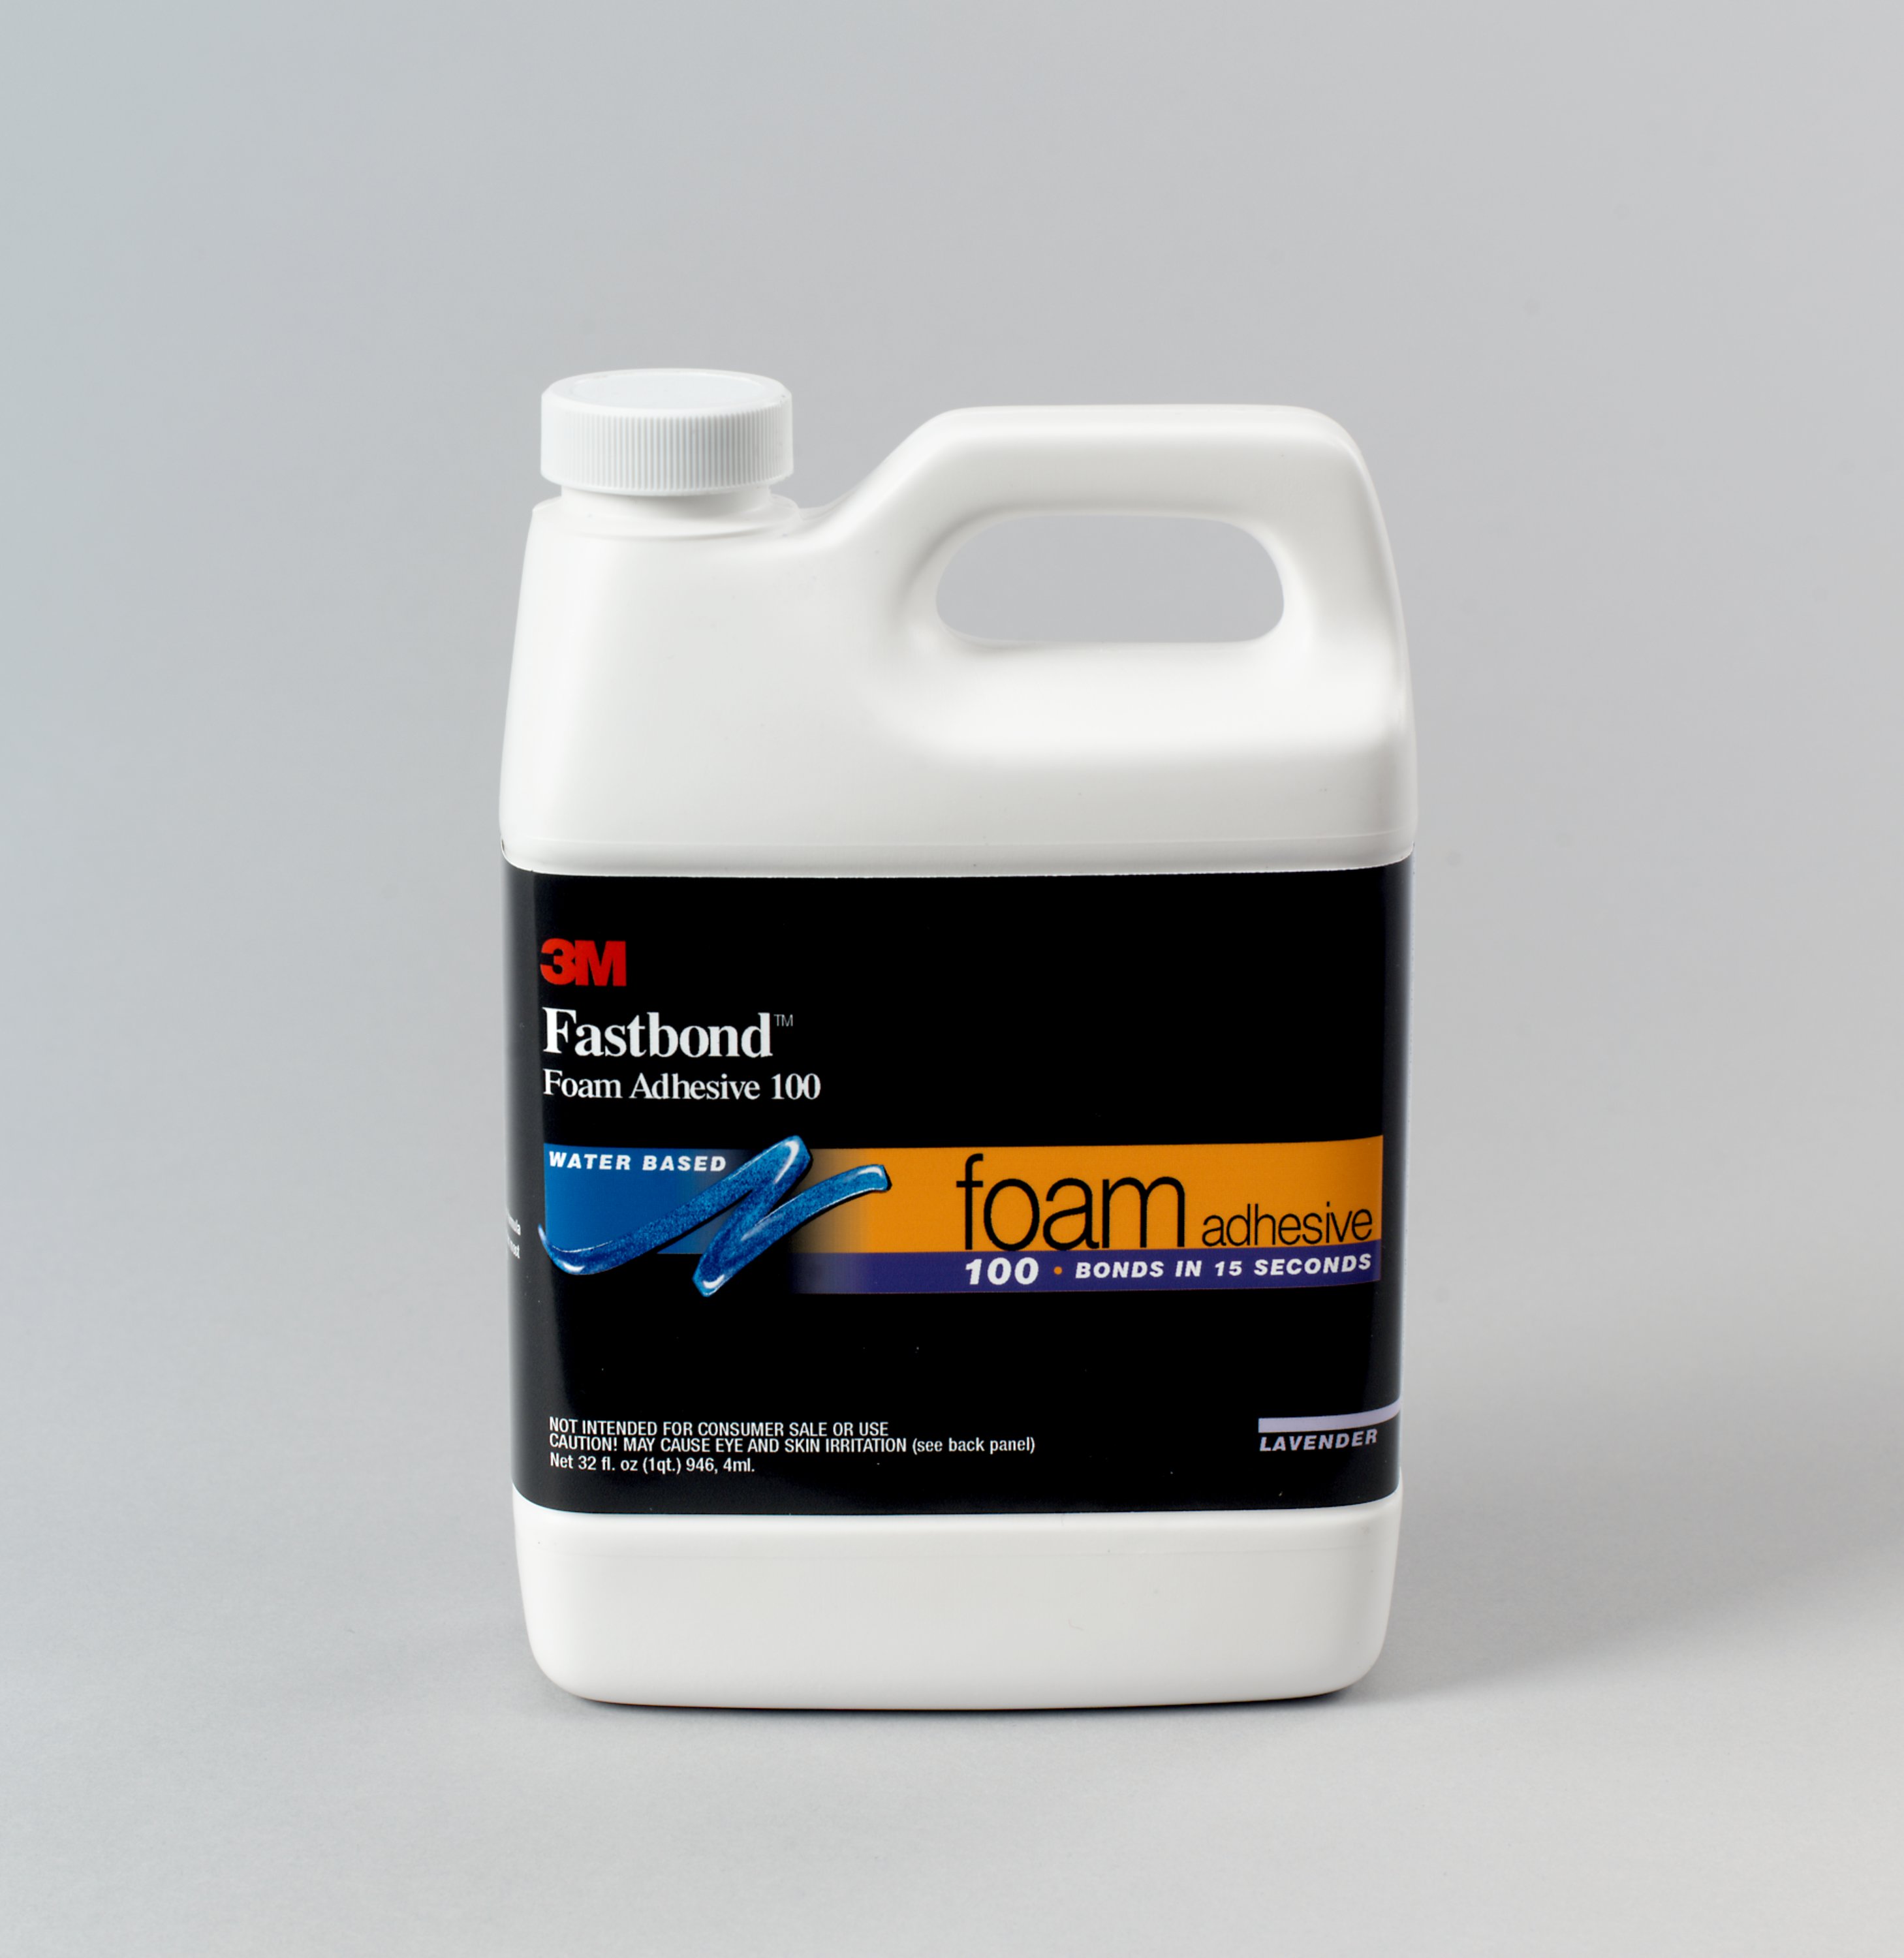 Container of 3M™ Fastbond™ Foam Adhesive 100NF